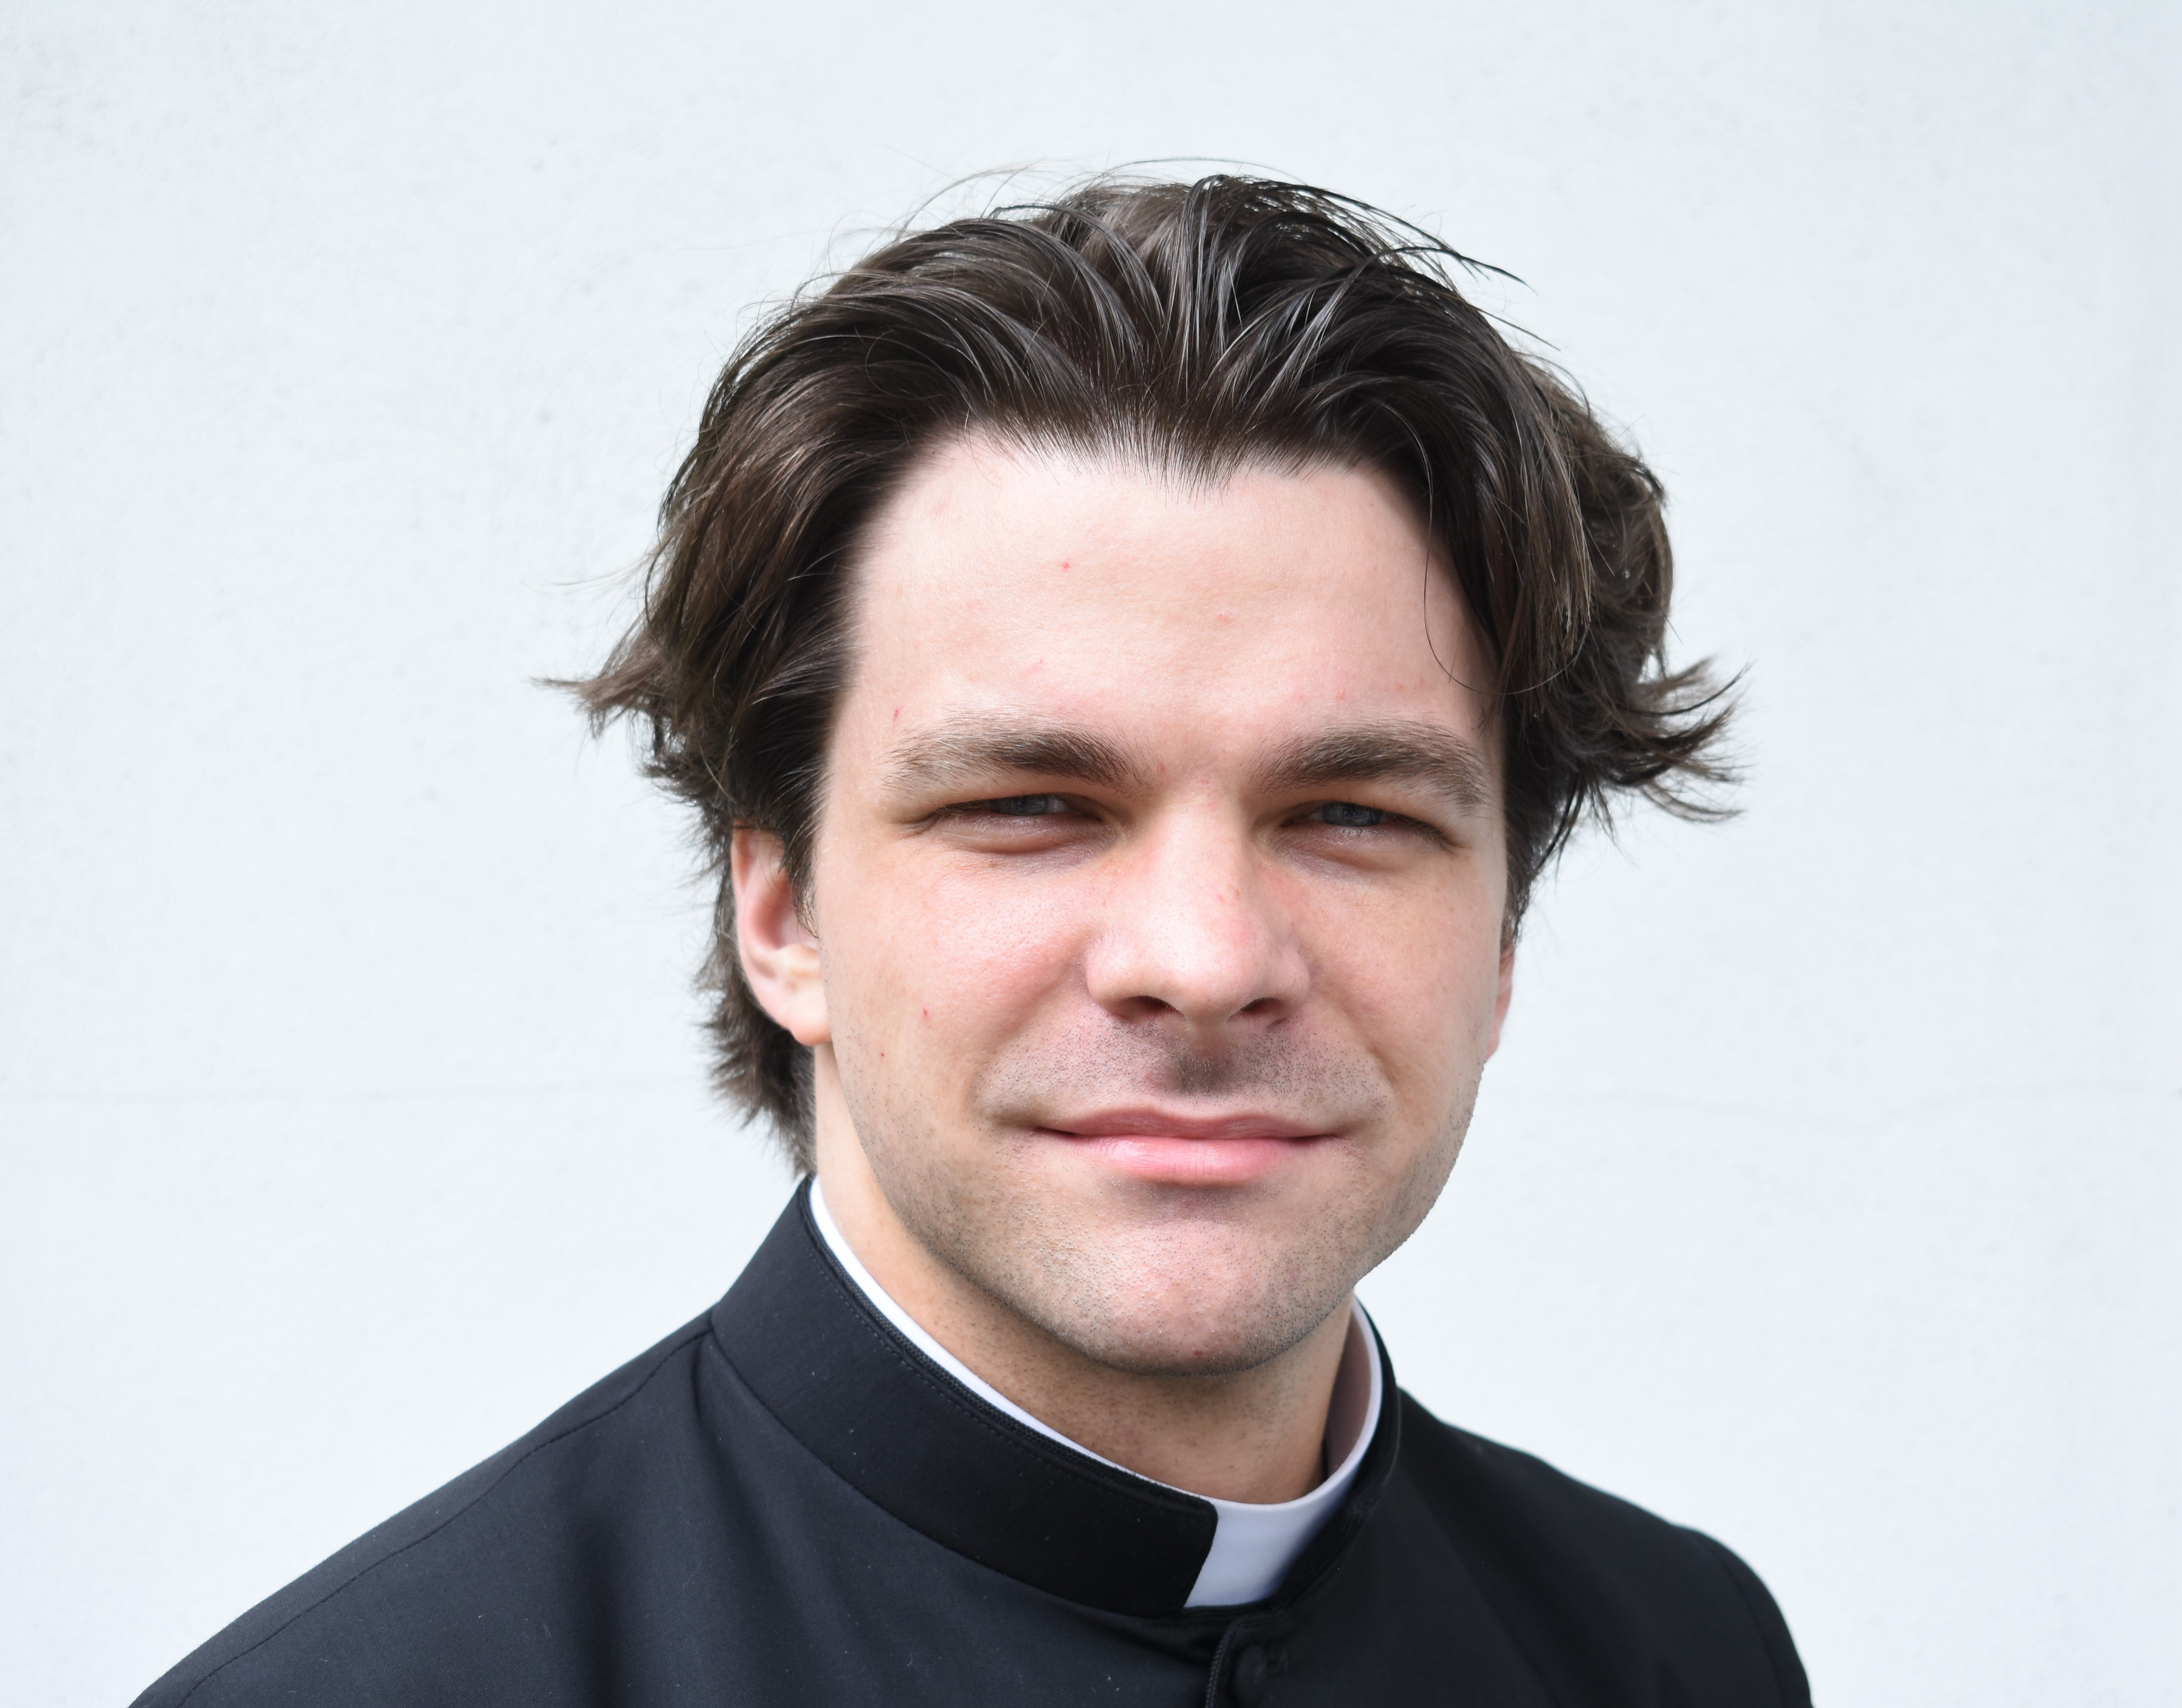 A white man with brown hair wears a clerical collar. His hair is shorter on the sides and longer on top.